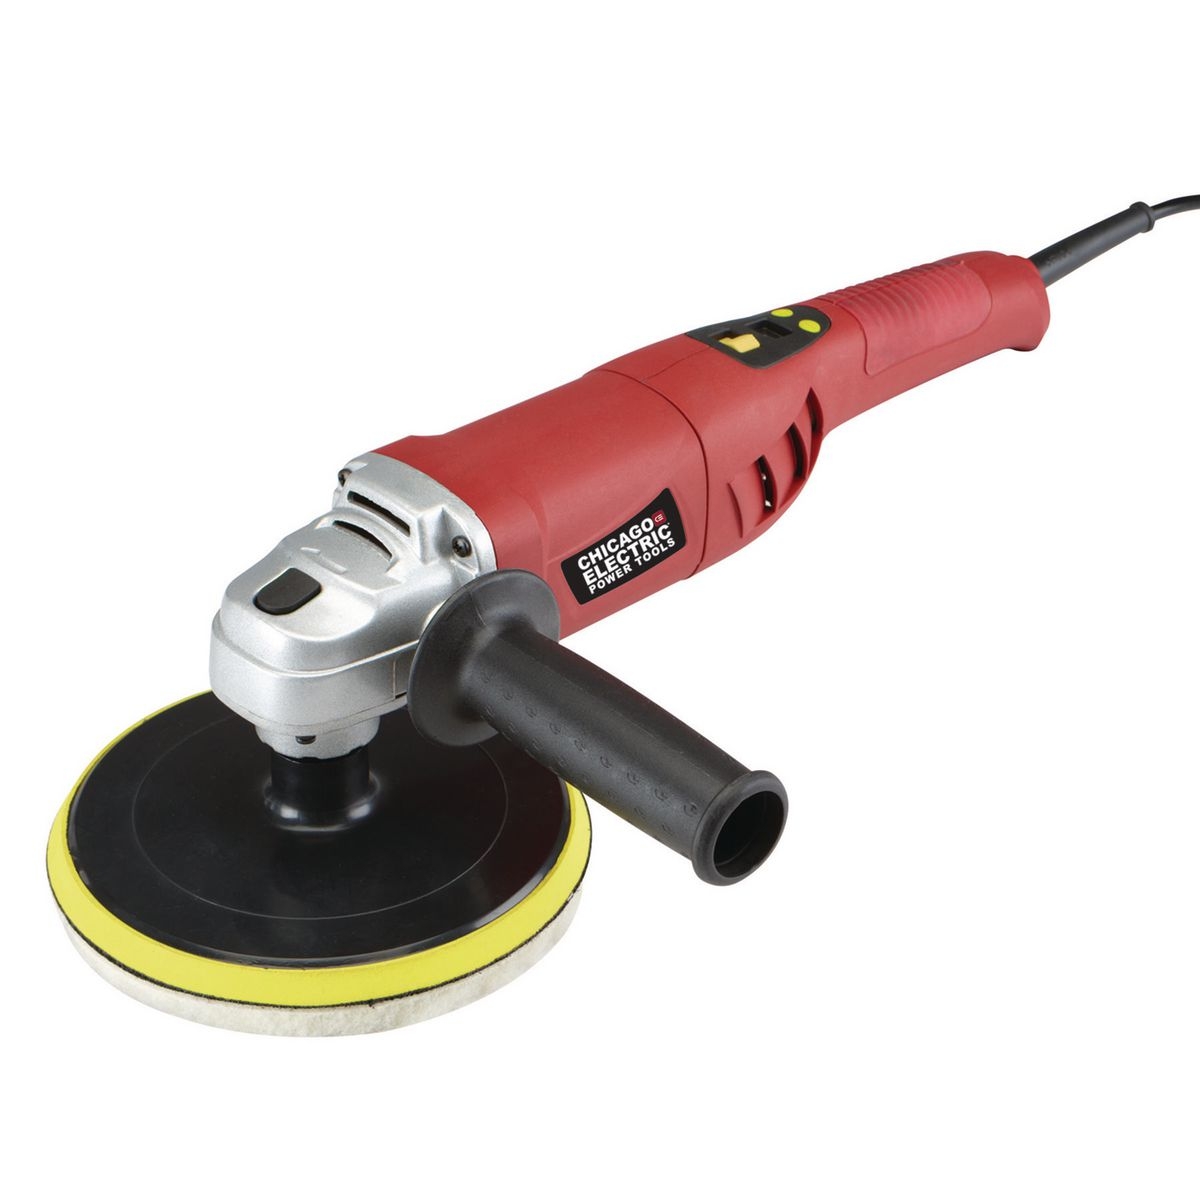 CHICAGO ELECTRIC 7 in. 10 Amp Digital Variable Speed Polisher – Item